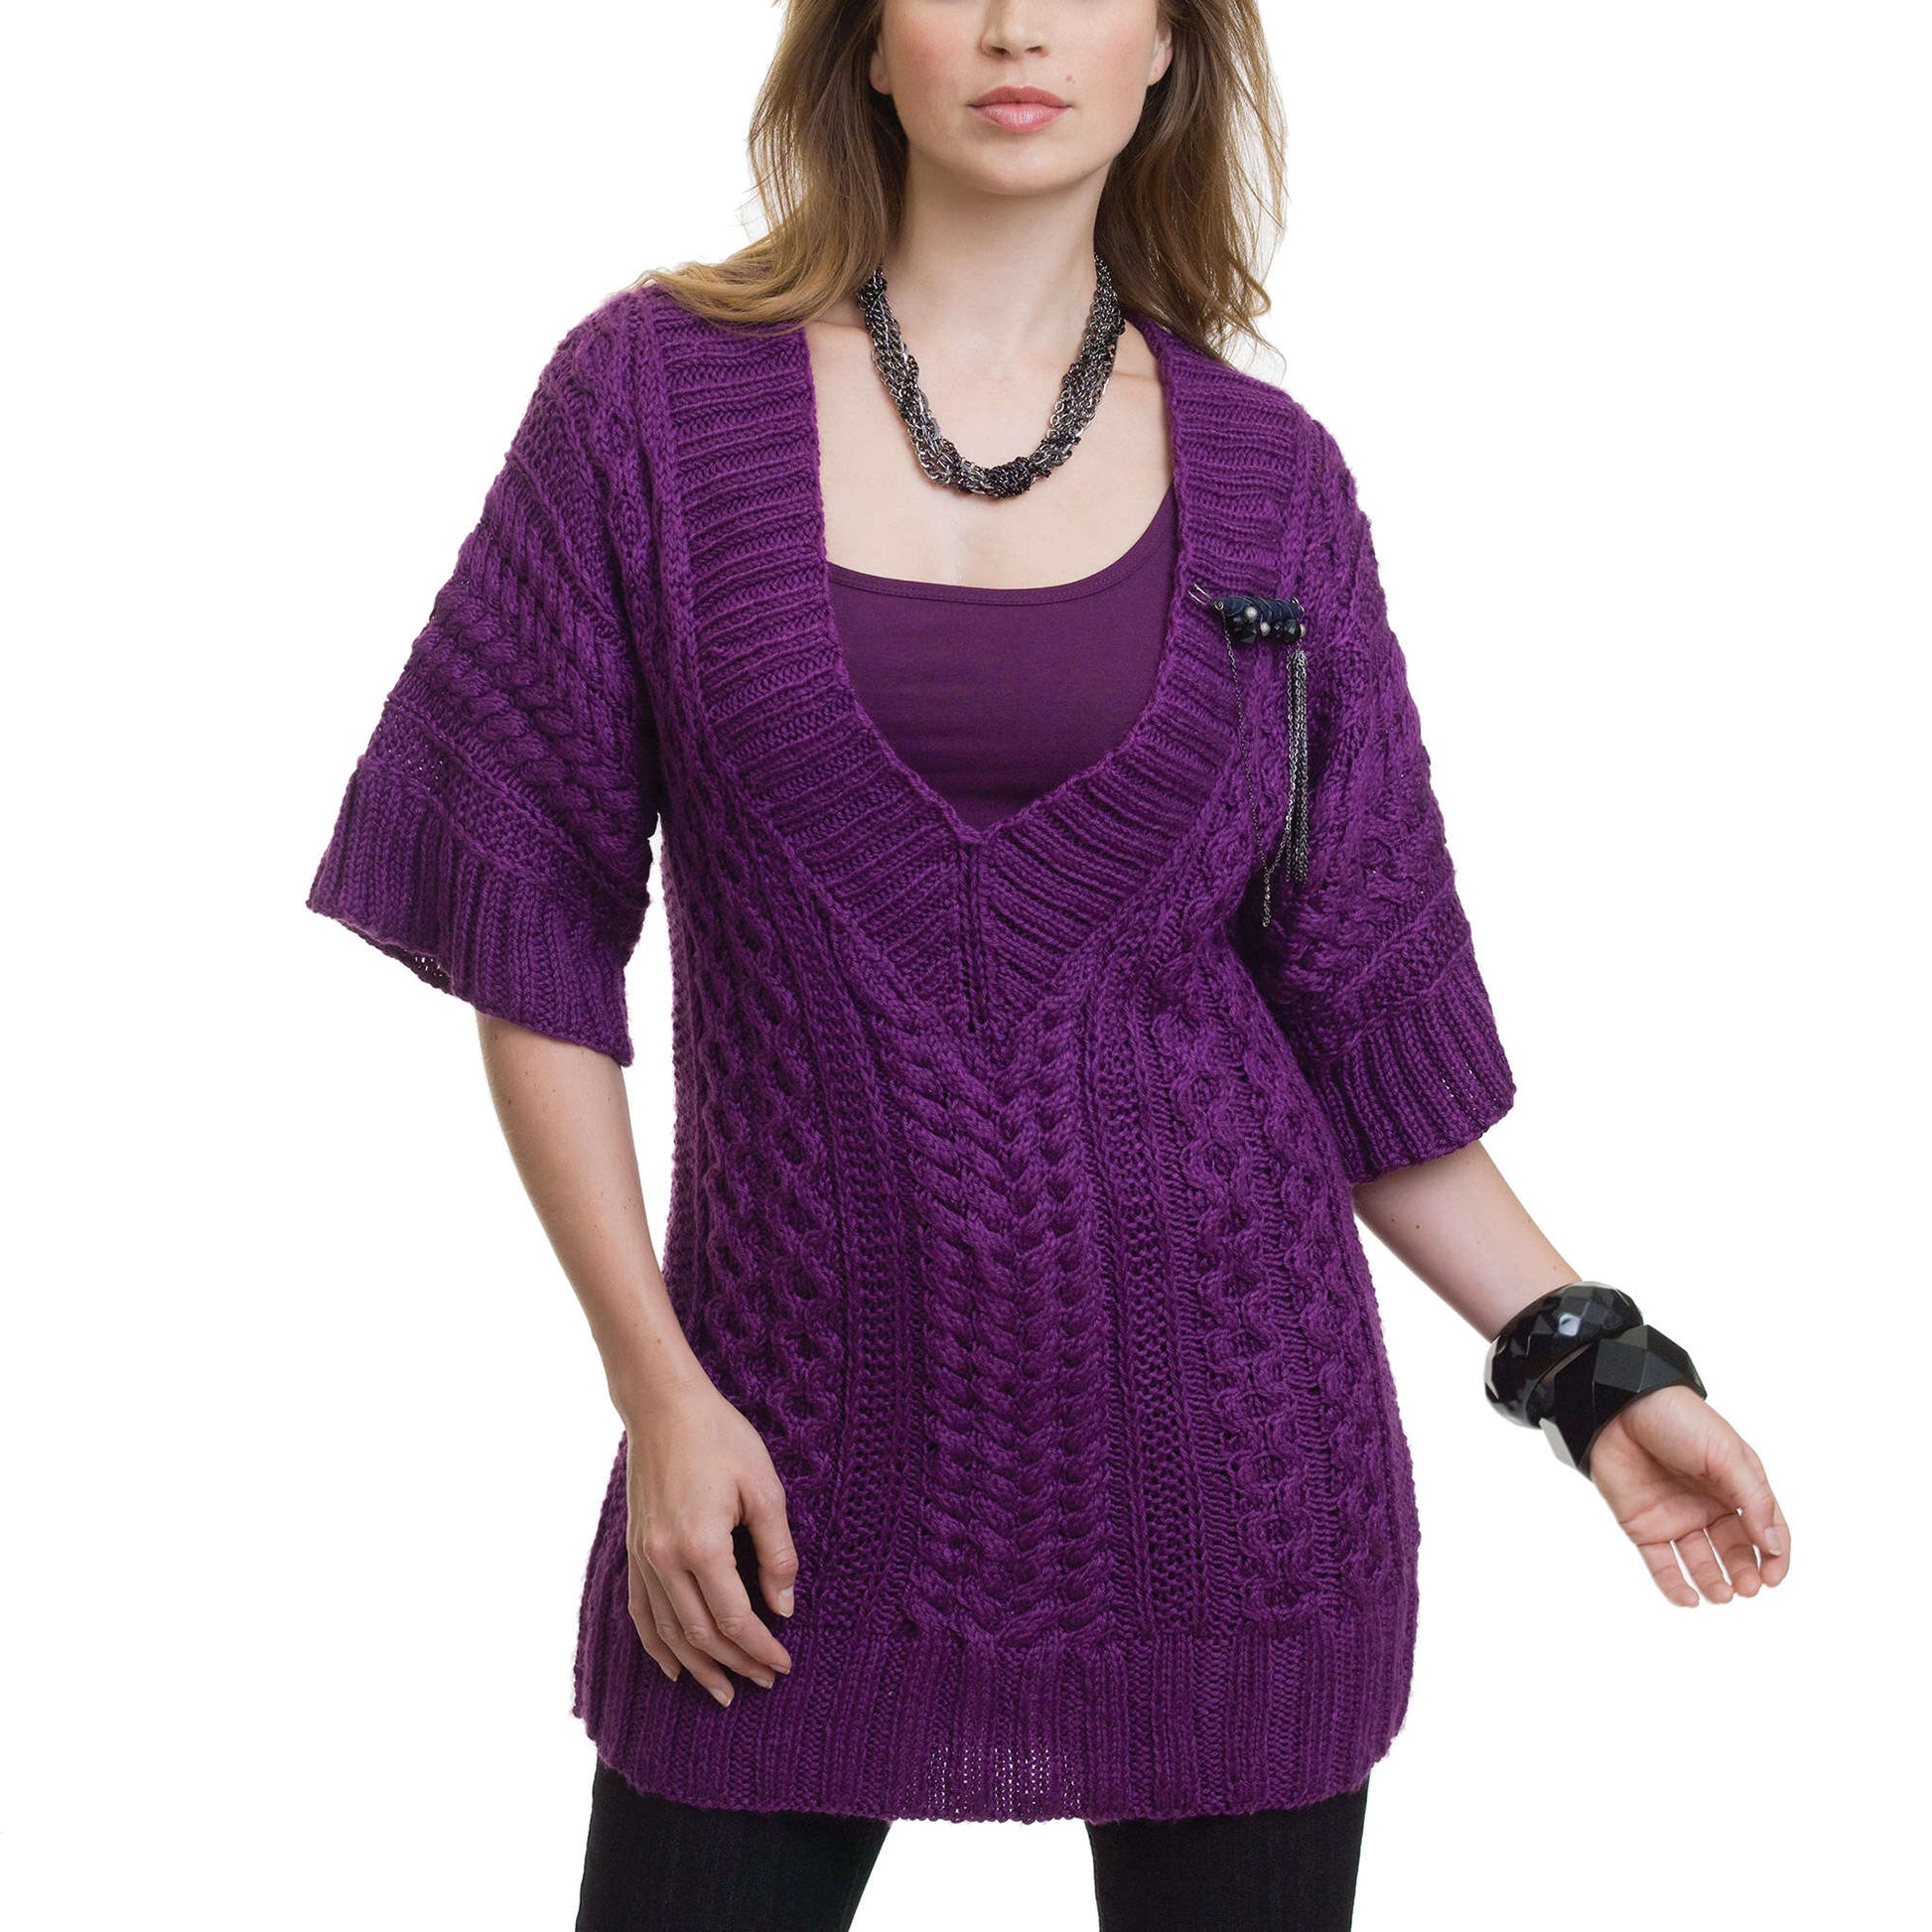 Free Caron Cabled Tunic Knit Pattern